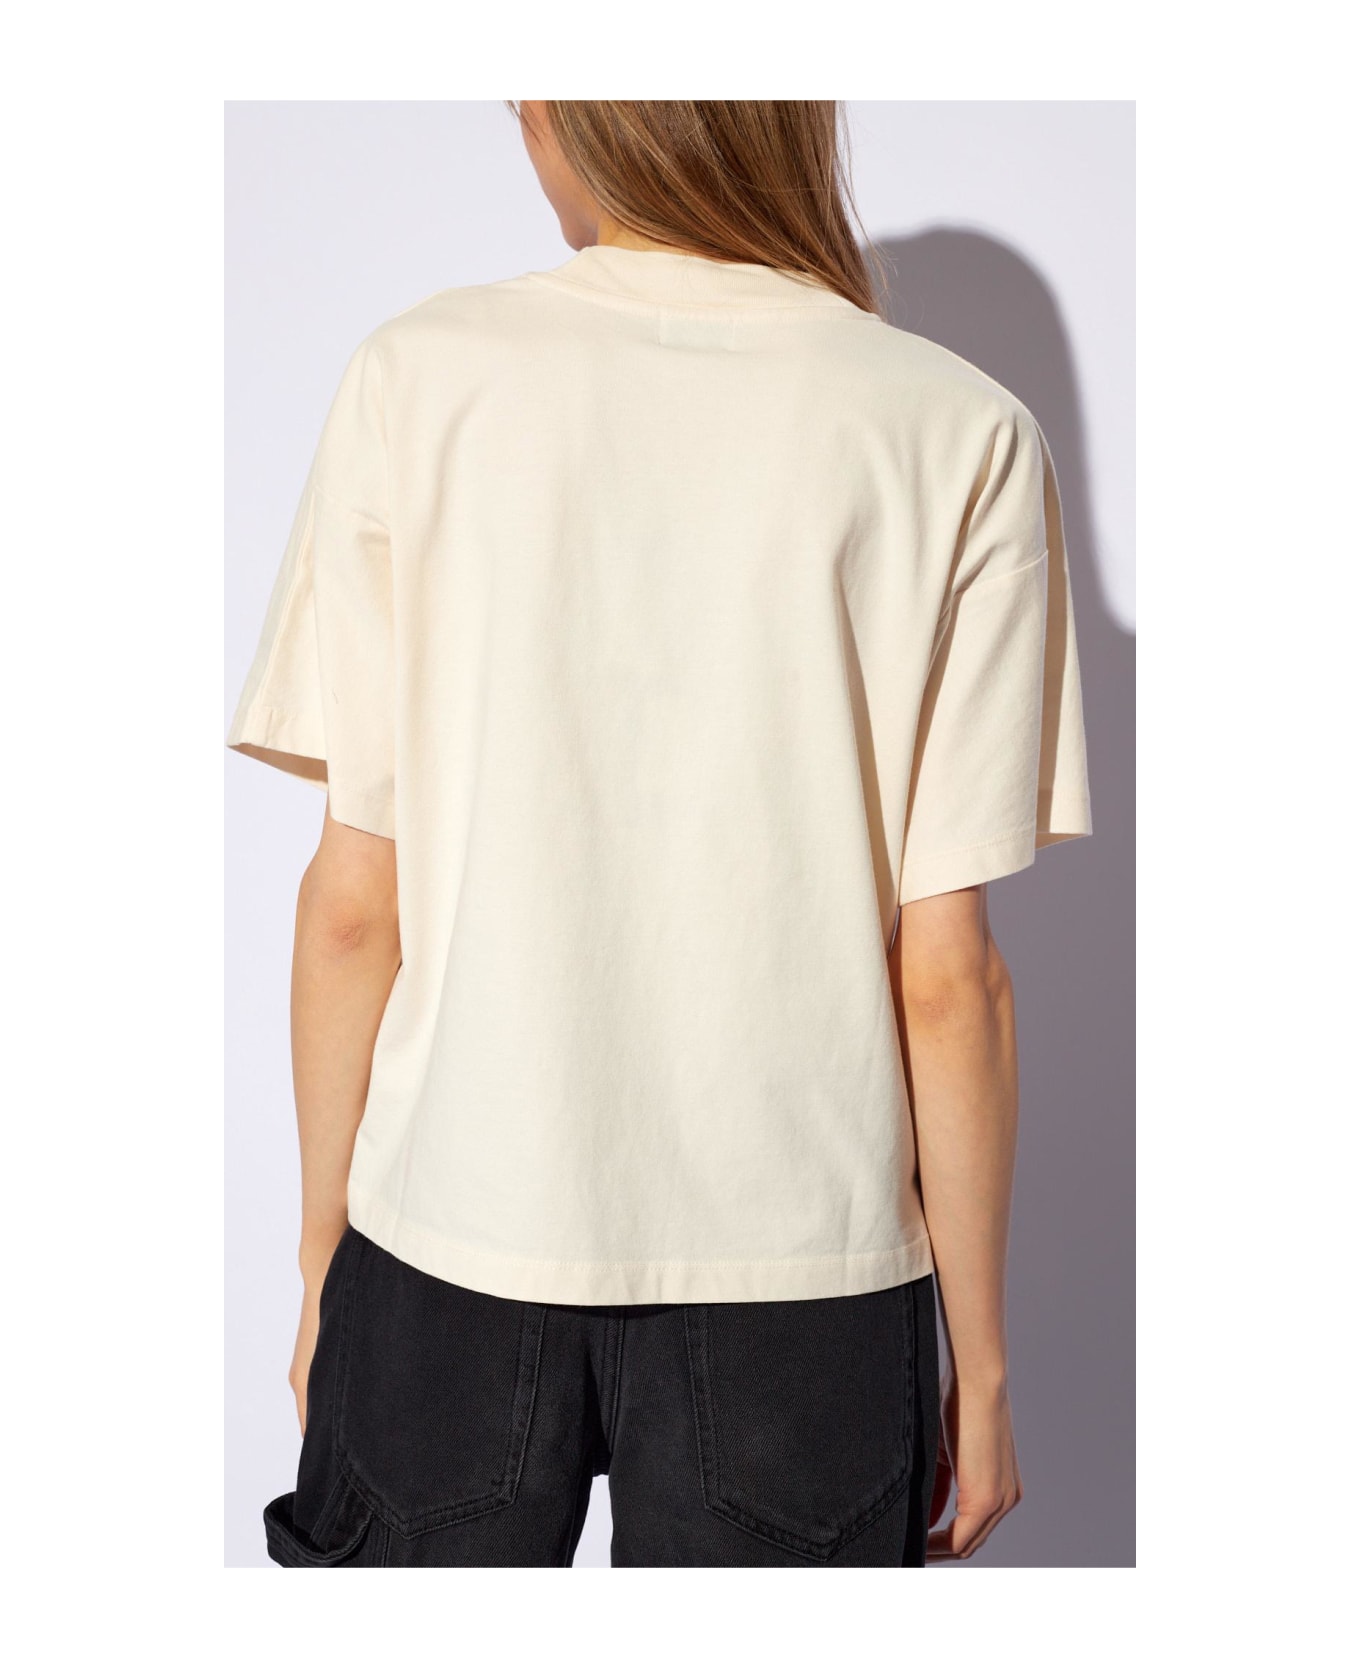 Woolrich Cotton T-shirt With Logo - White